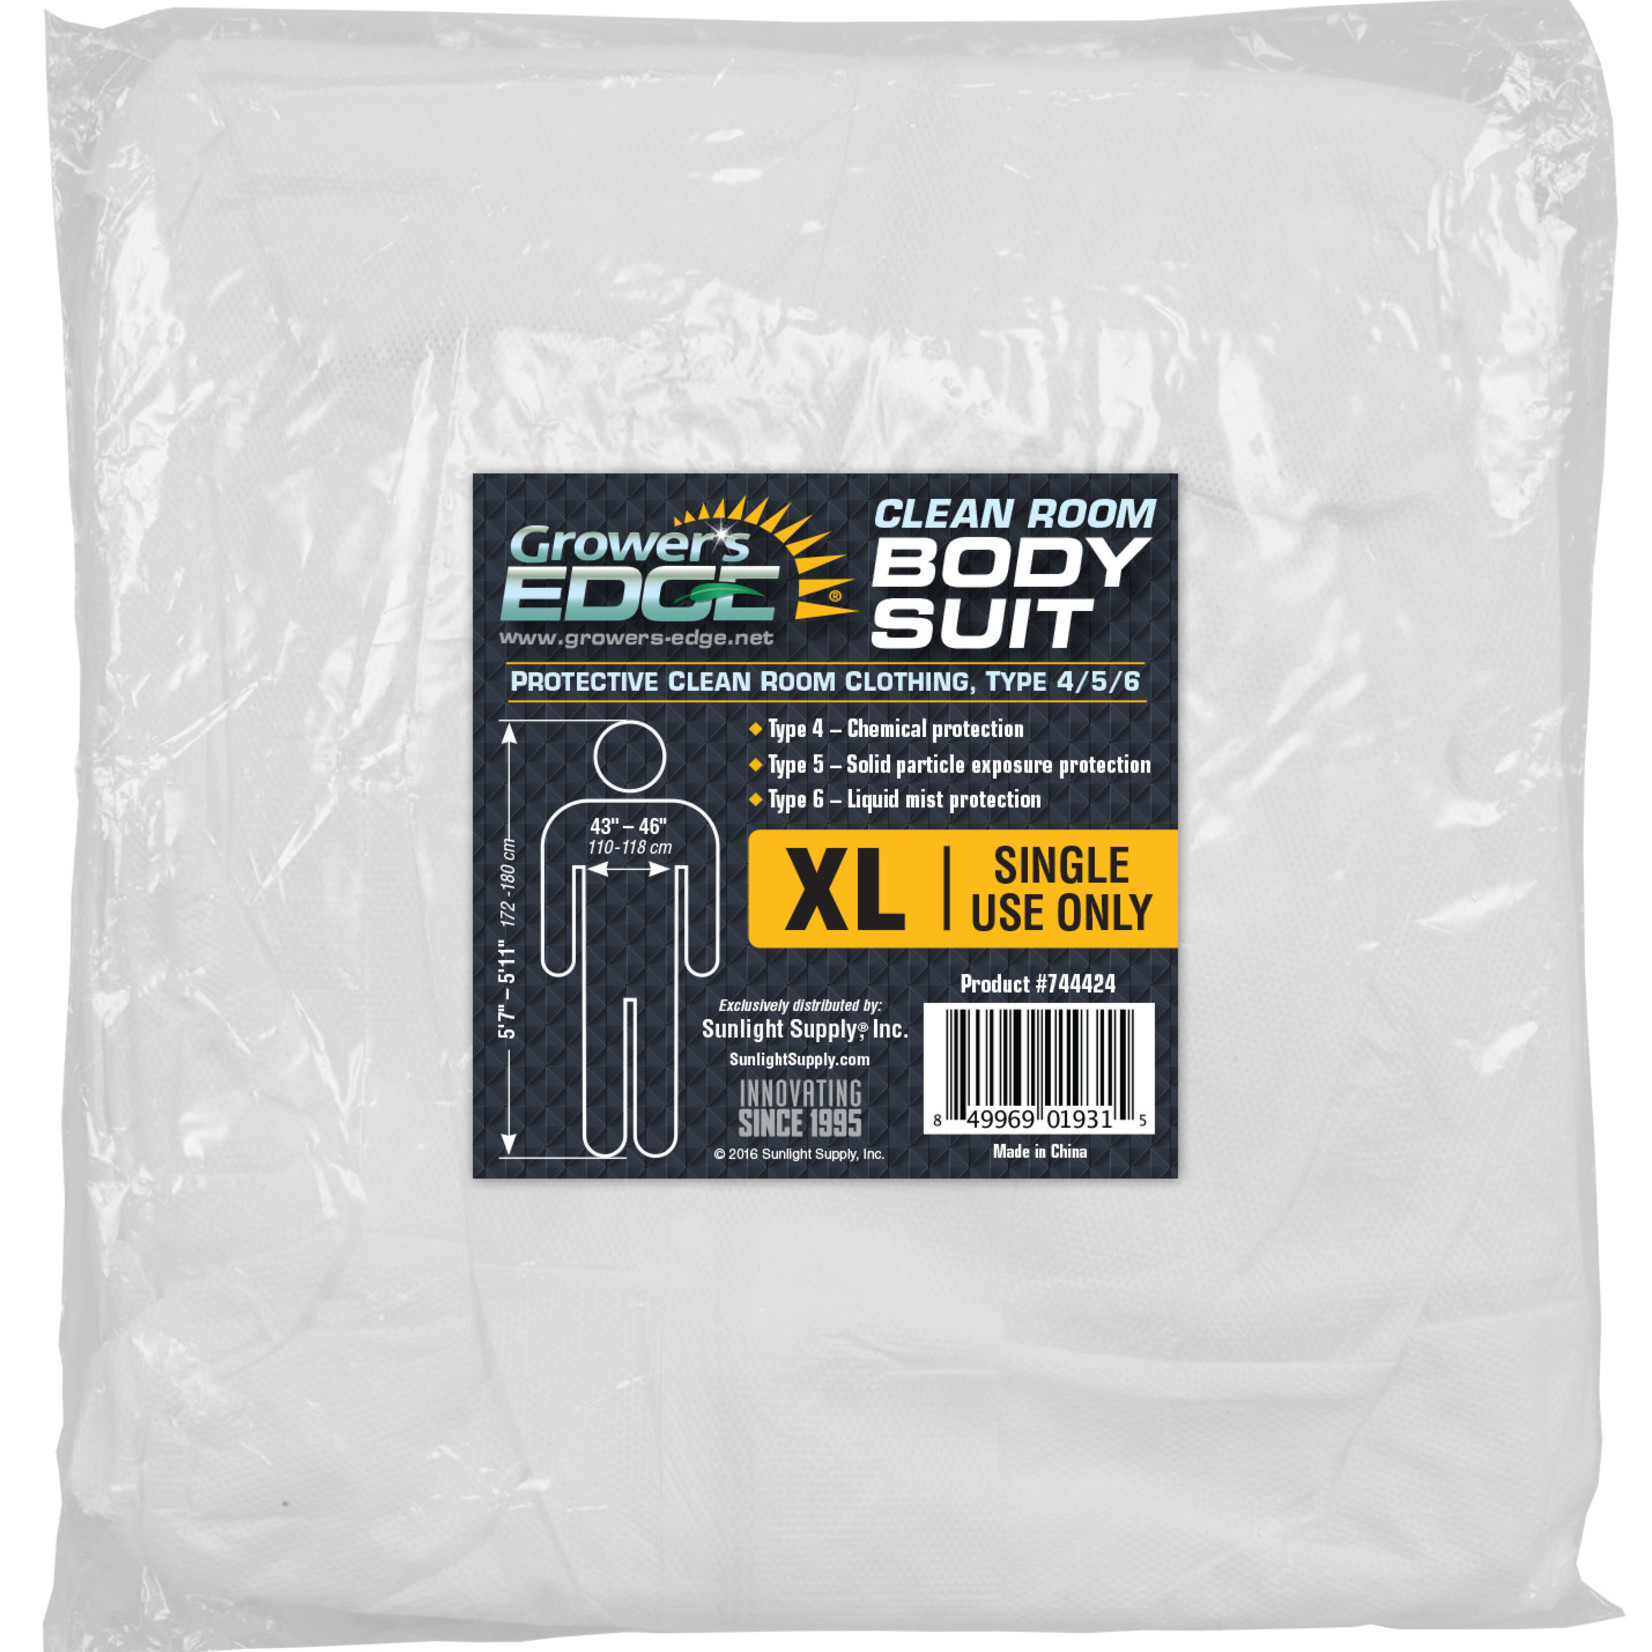 Grower's Edge Grower's Edge Clean Room Body Suit - Size XL